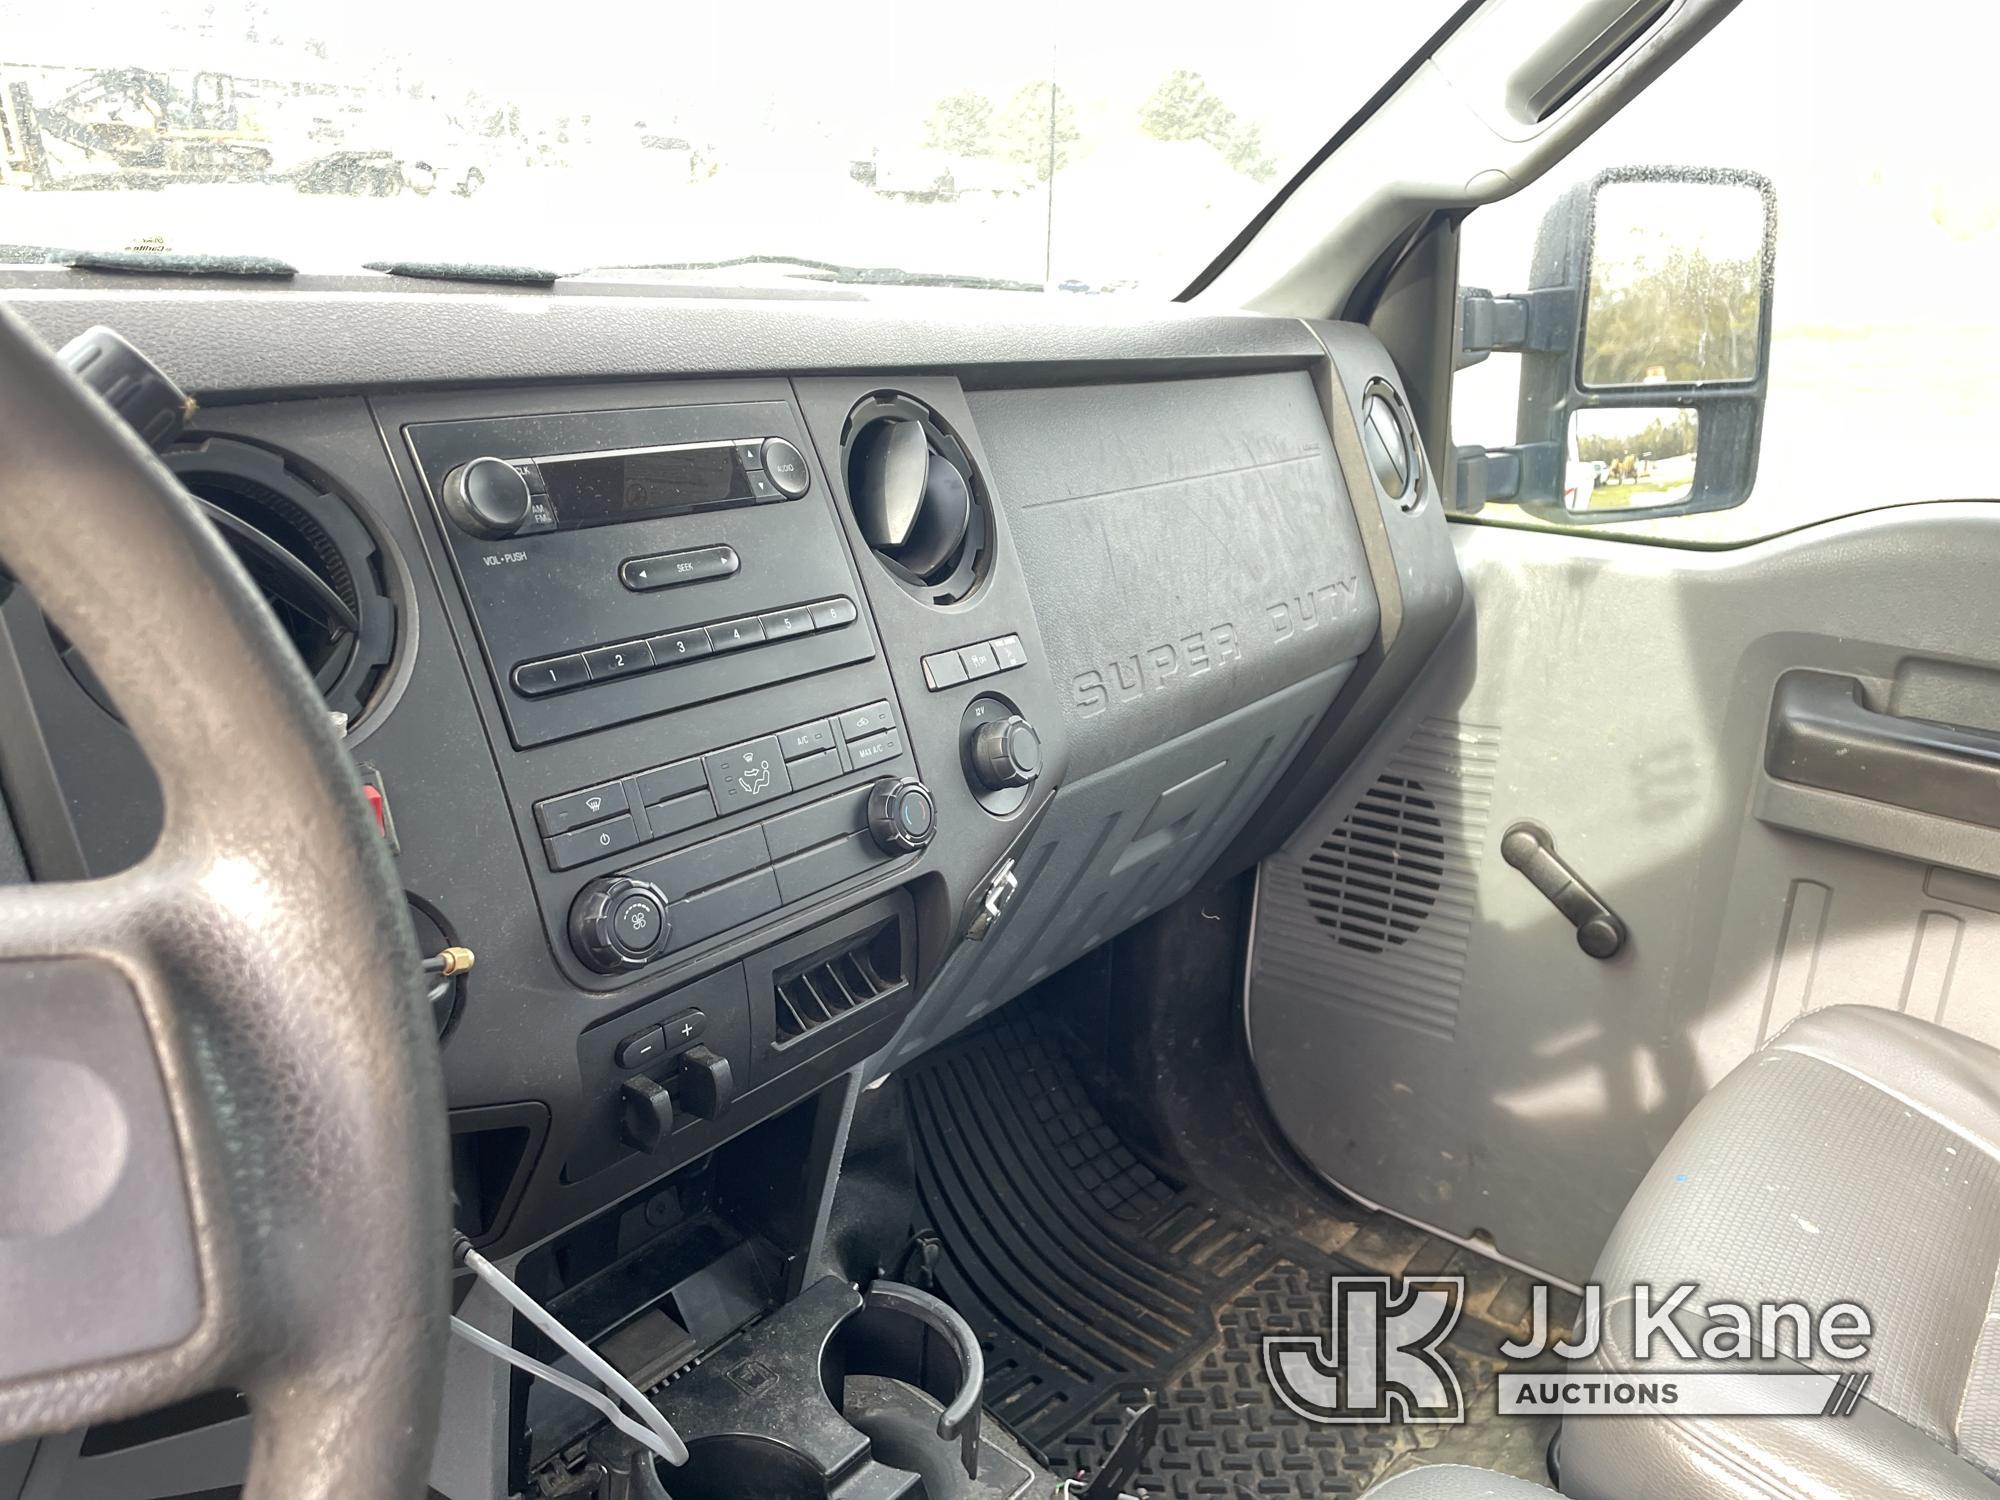 (Dothan, AL) 2012 Ford F250 Pickup Truck, (Municipality Owned) Runs & Moves ) (Jump to Start